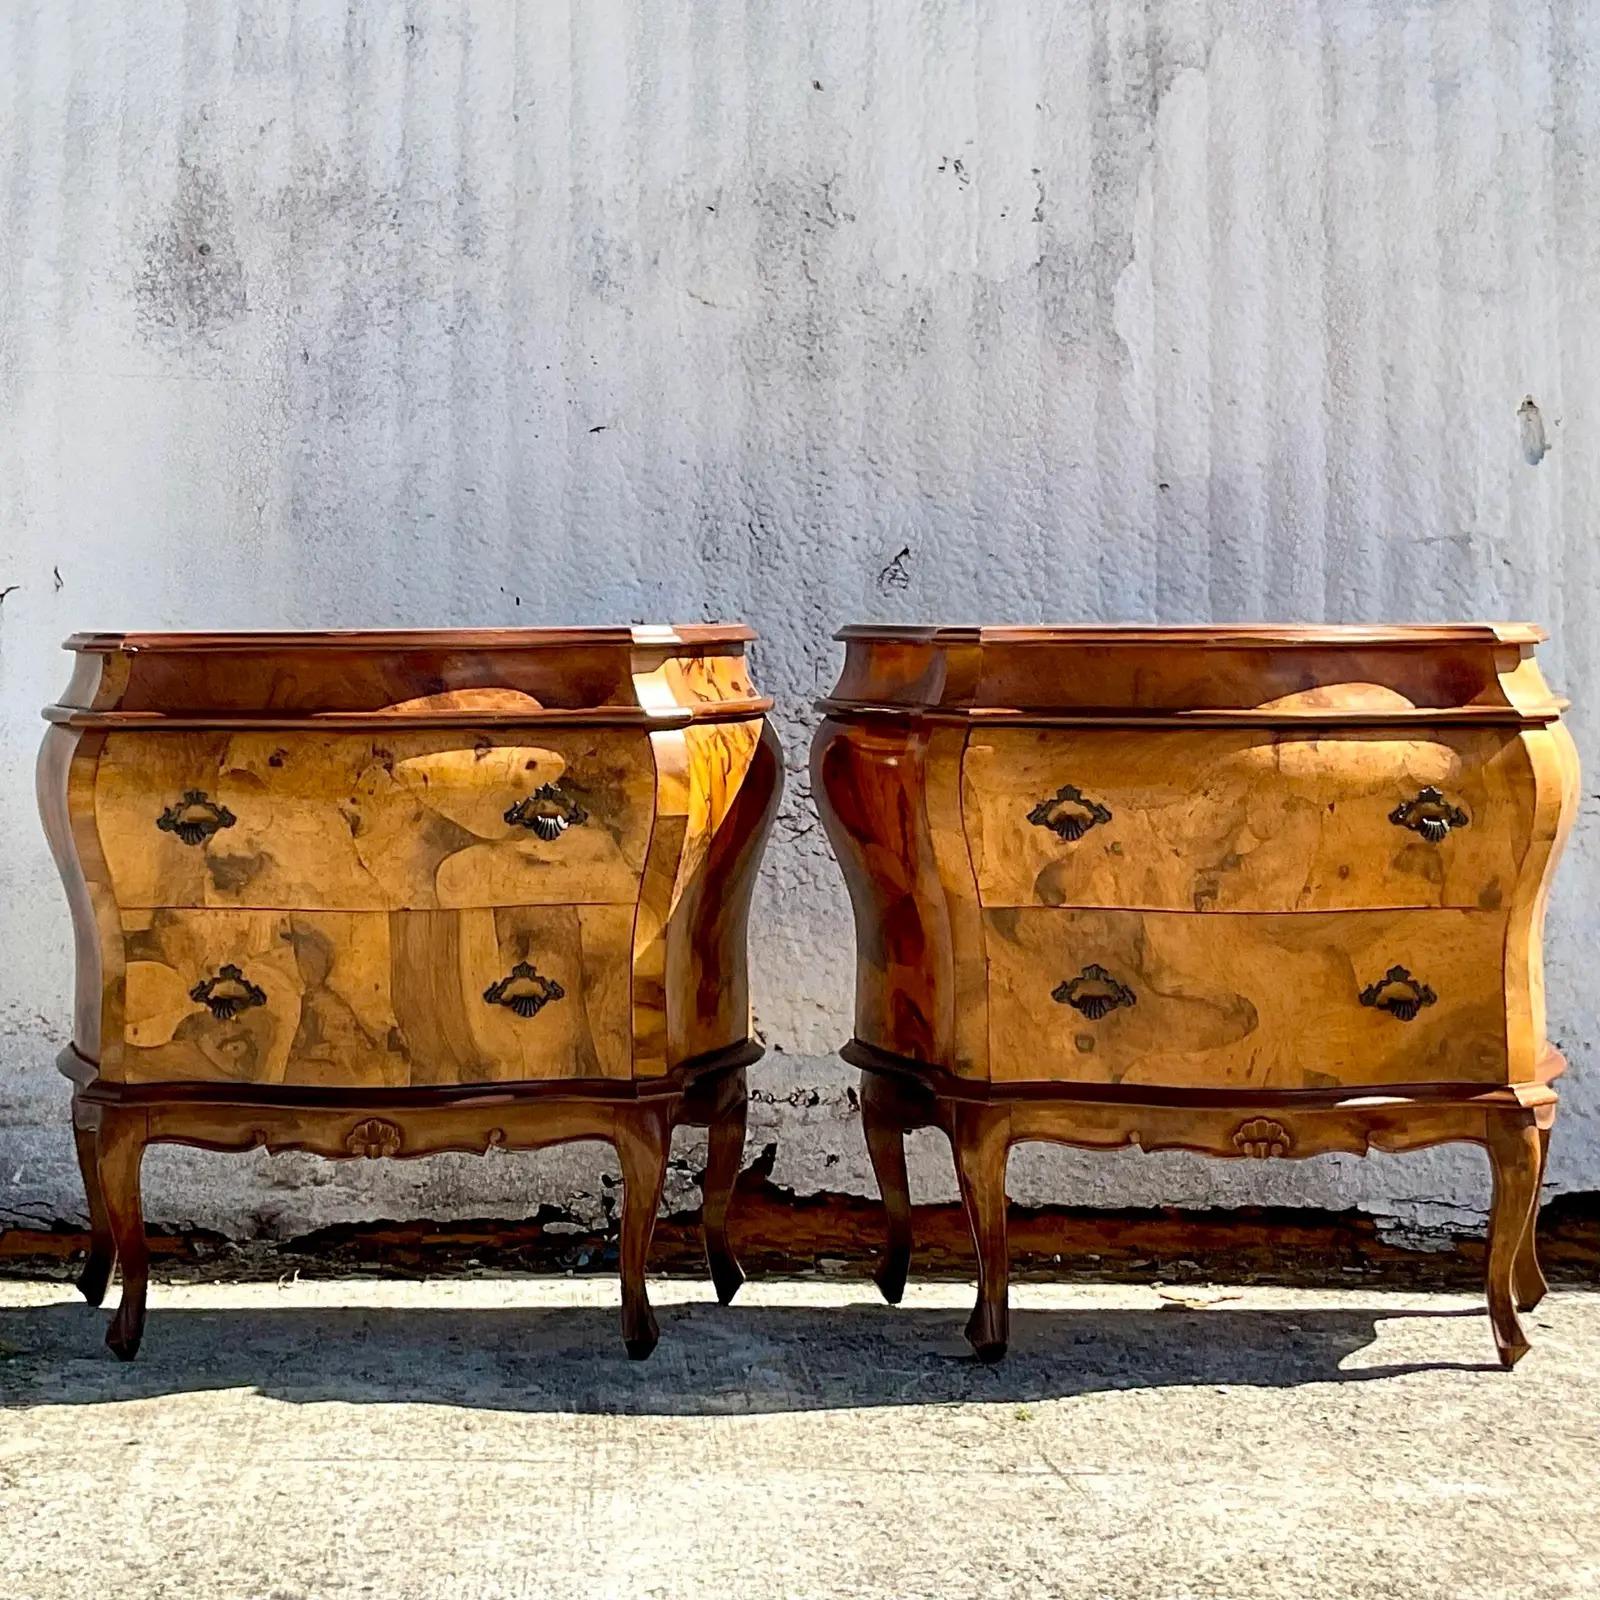 A spectacular pair of vintage Regency Italian Chests. Beautiful patchwork Olive Burl wood with brass hardware. Incredible wood grain detail. Acquired from a Palm Beach estate.